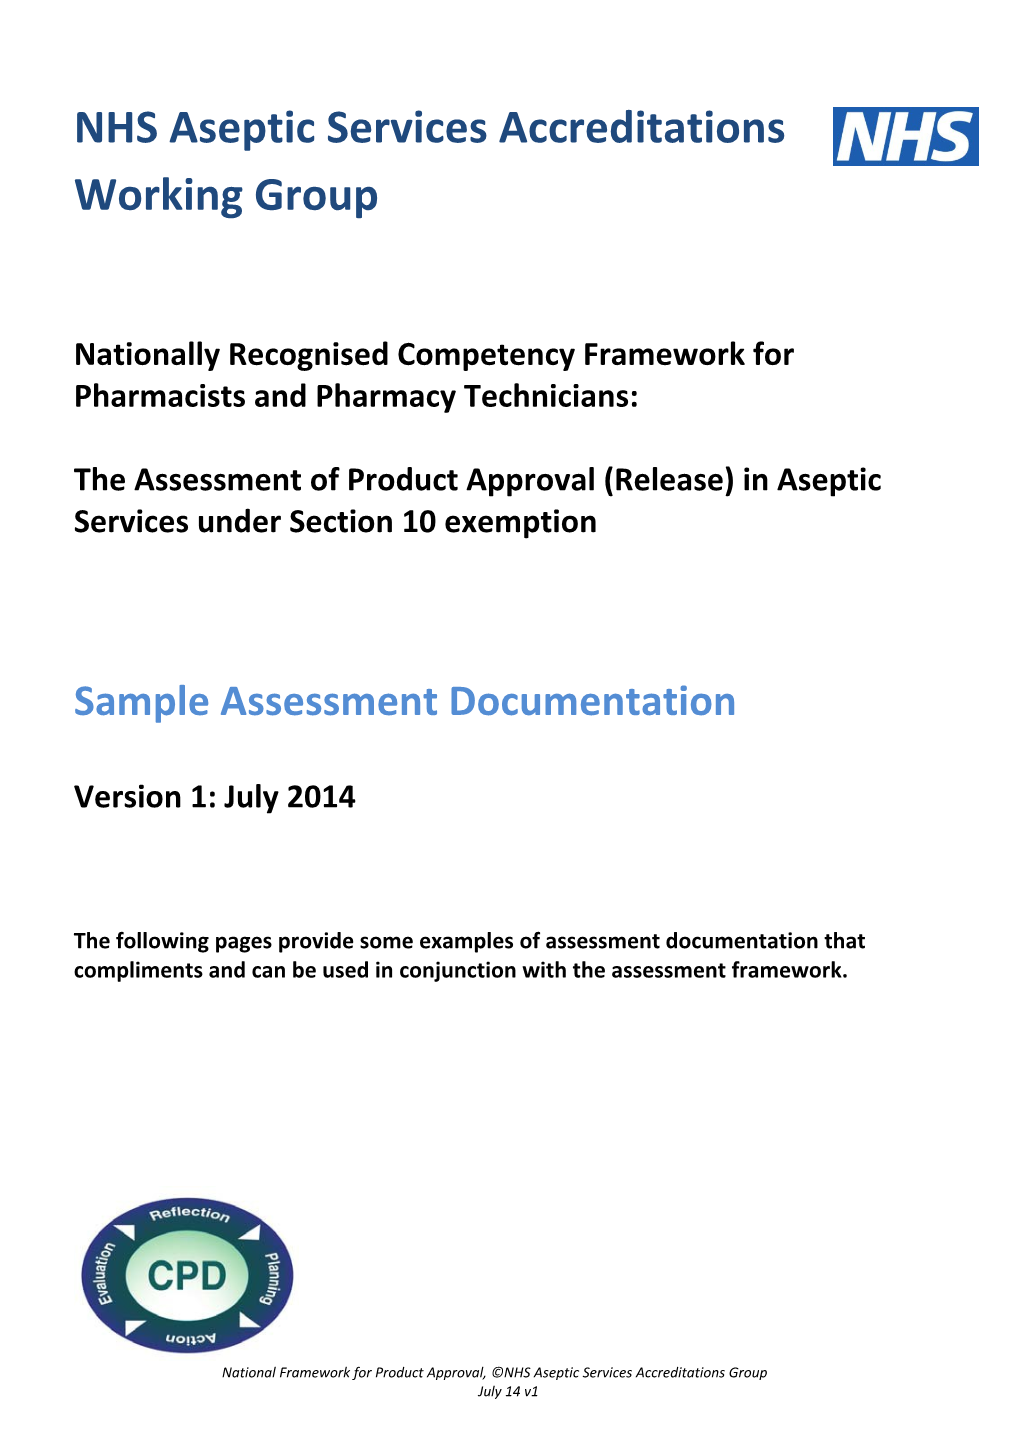 Nationally Recognised Competency Framework for Pharmacists and Pharmacy Technicians